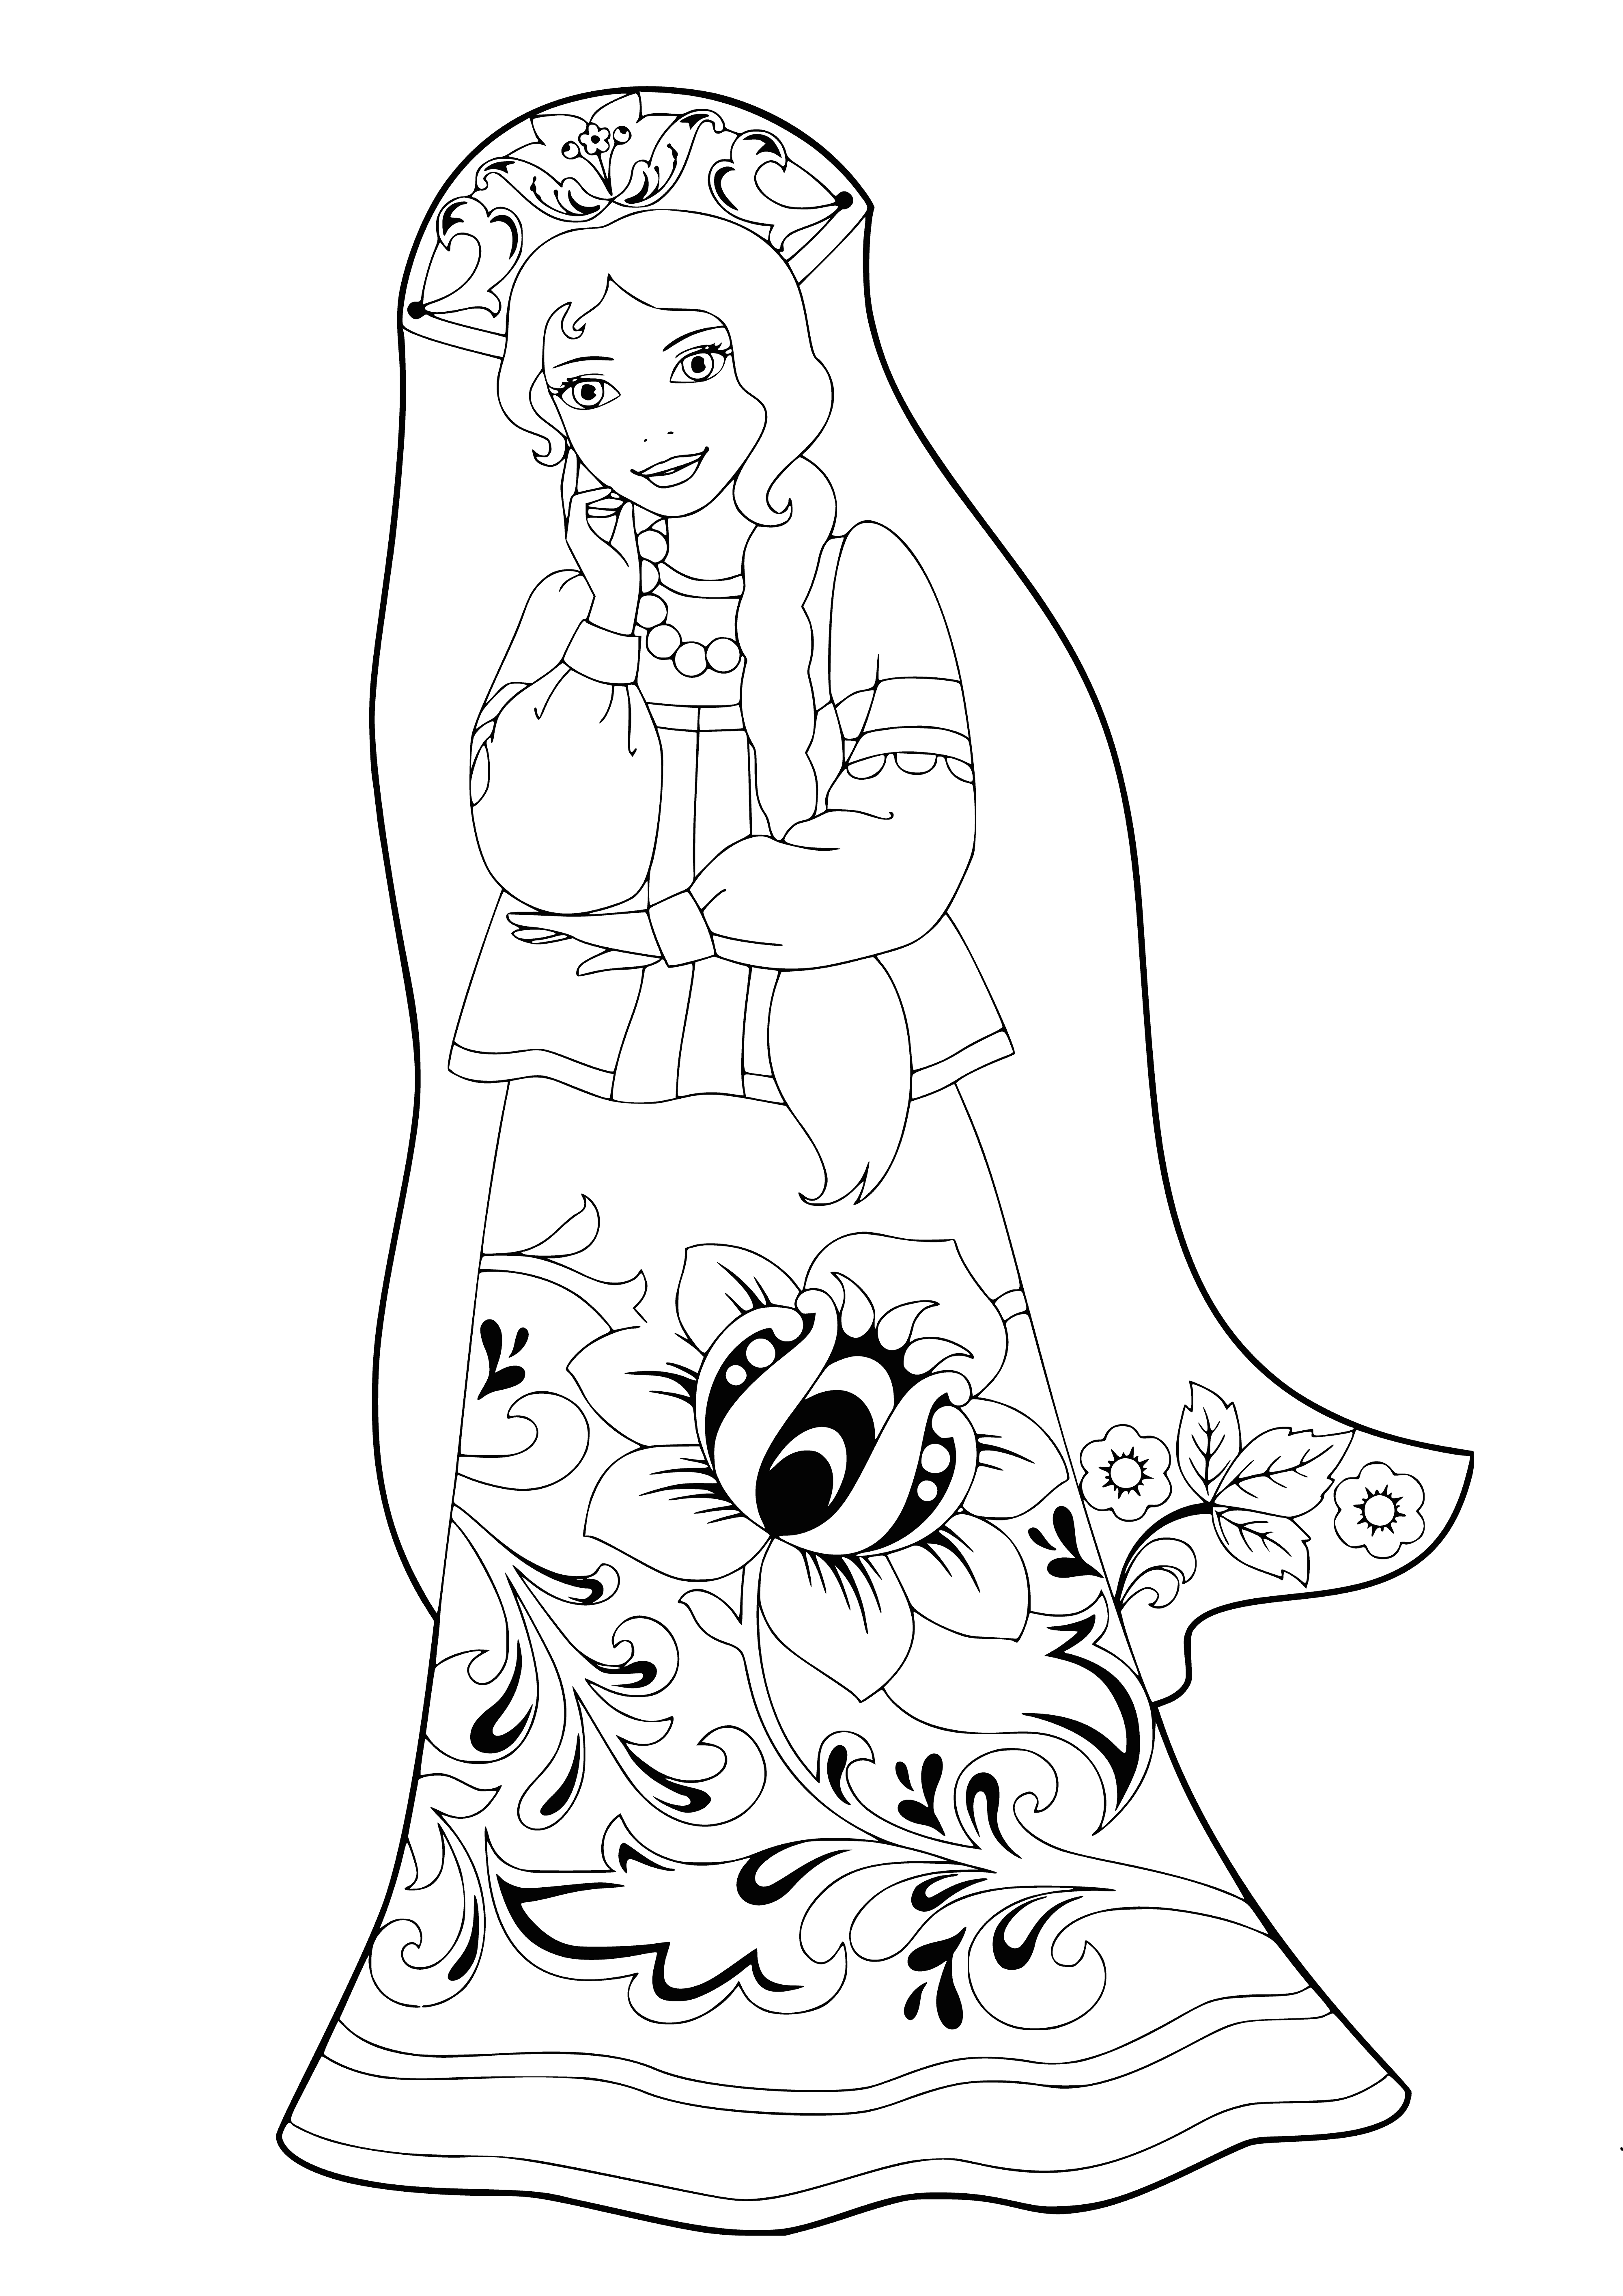 coloring page: 3 Russian beauties in elegant dresses, happy & ready for a great time!